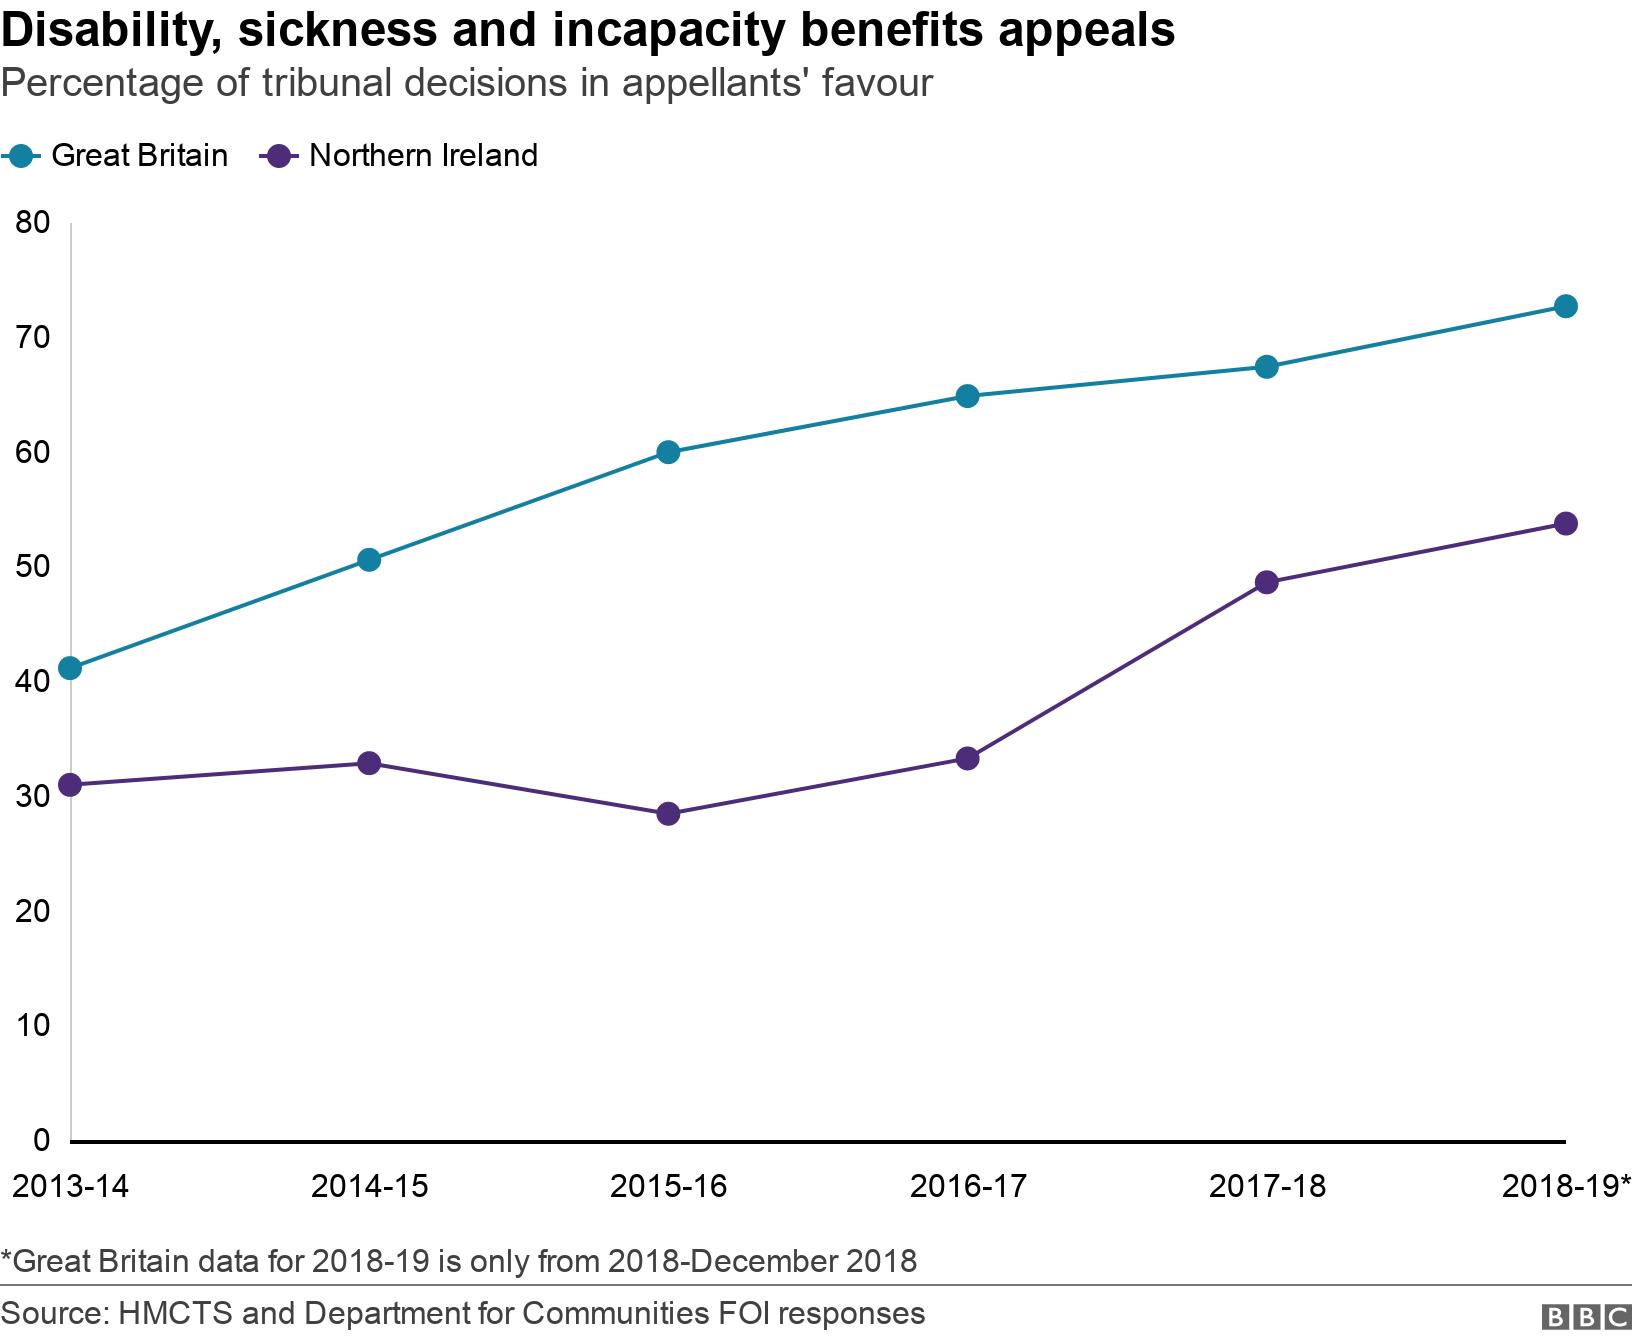 Disability, sickness and incapacity benefits appeals. Percentage of tribunal decisions in appellants' favour. The line chart shows the percentage of appeals about disability, sickness and incapacity benefits which were decided in favour of appellants at tribunal in Great Britain and Northern Ireland from  *Great Britain data for 2018-19 is only from 2018-December 2018.